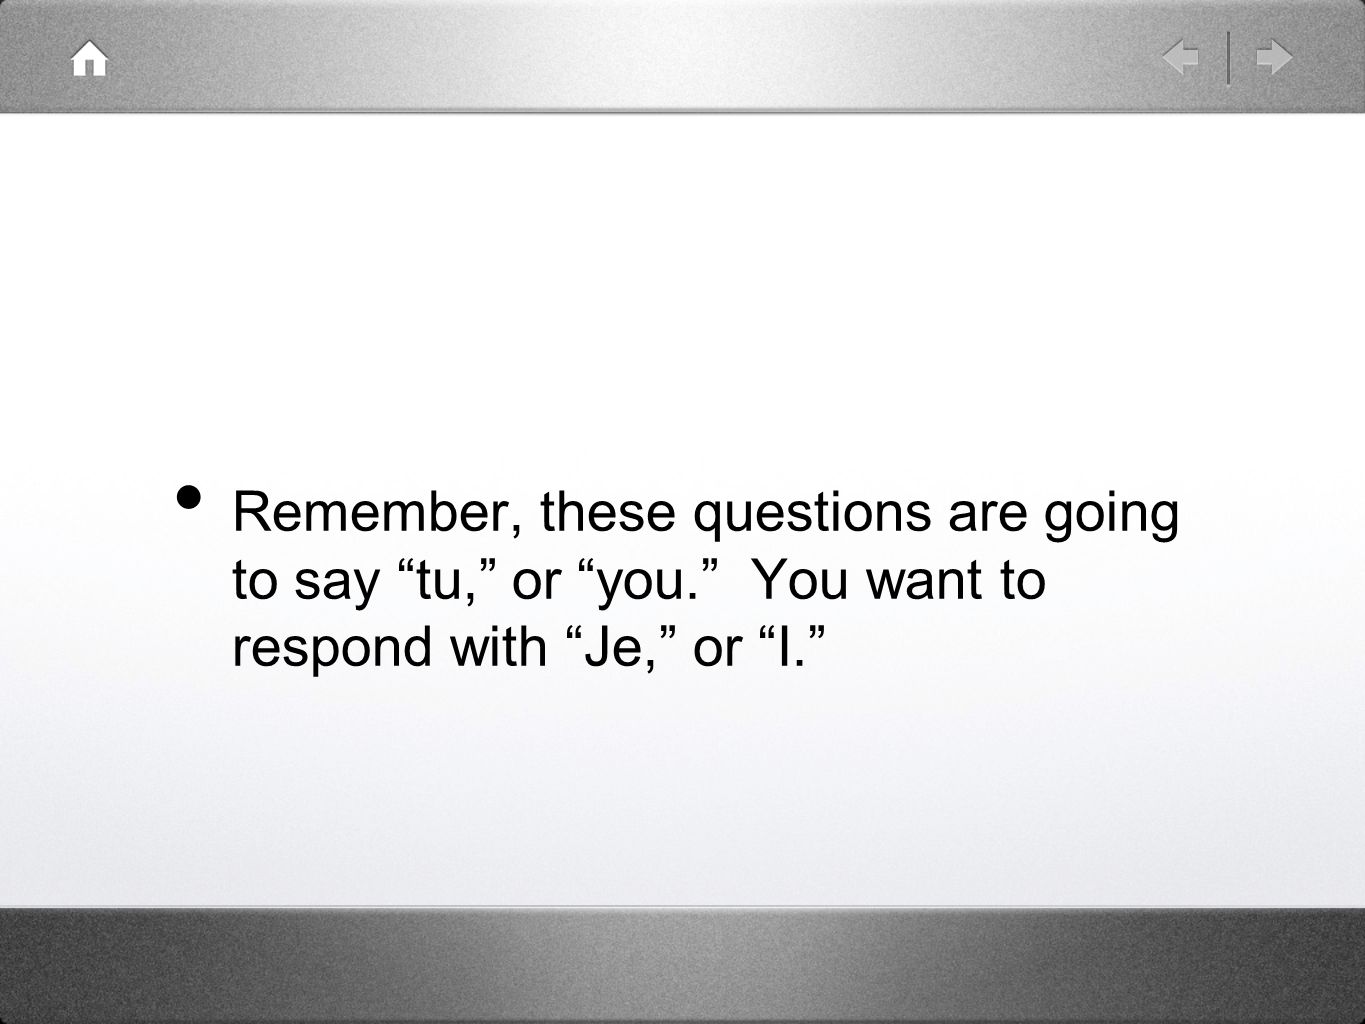 Remember, these questions are going to say tu, or you. You want to respond with Je, or I.